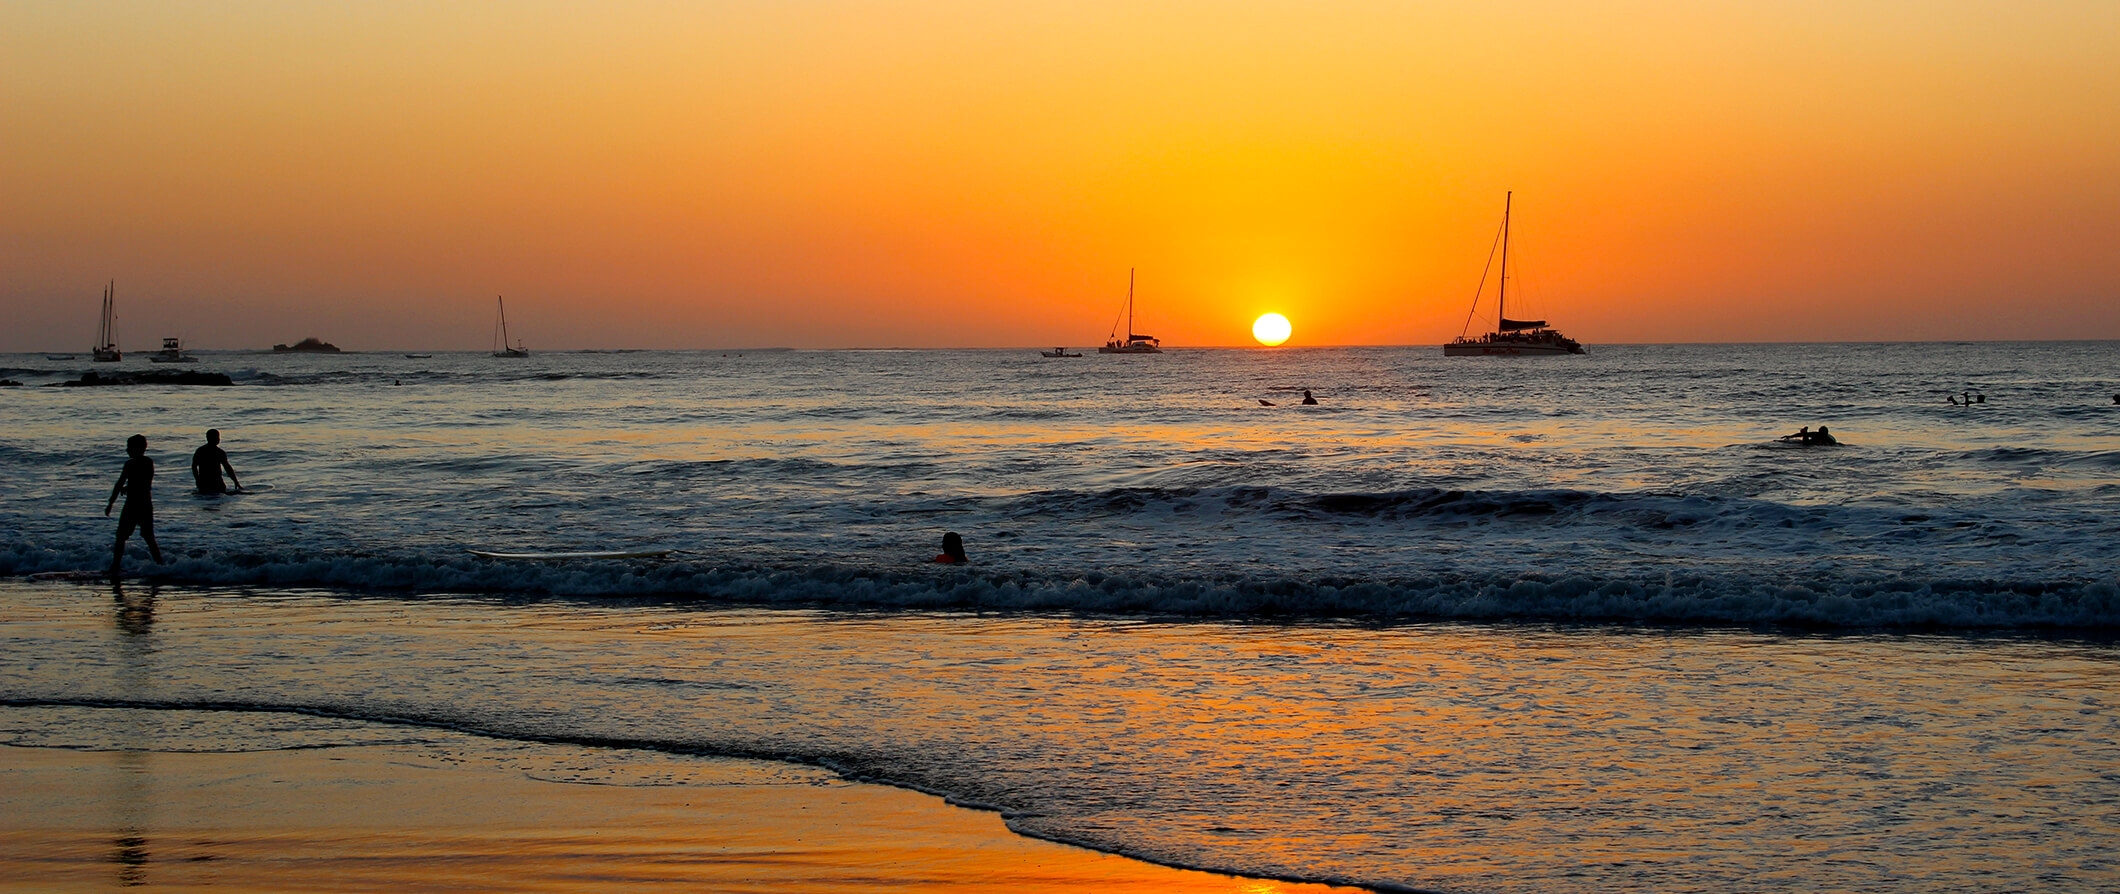 A beach in Tamarindo at sunset during the golden hour. People swimming in the sea, sailboats in the distance